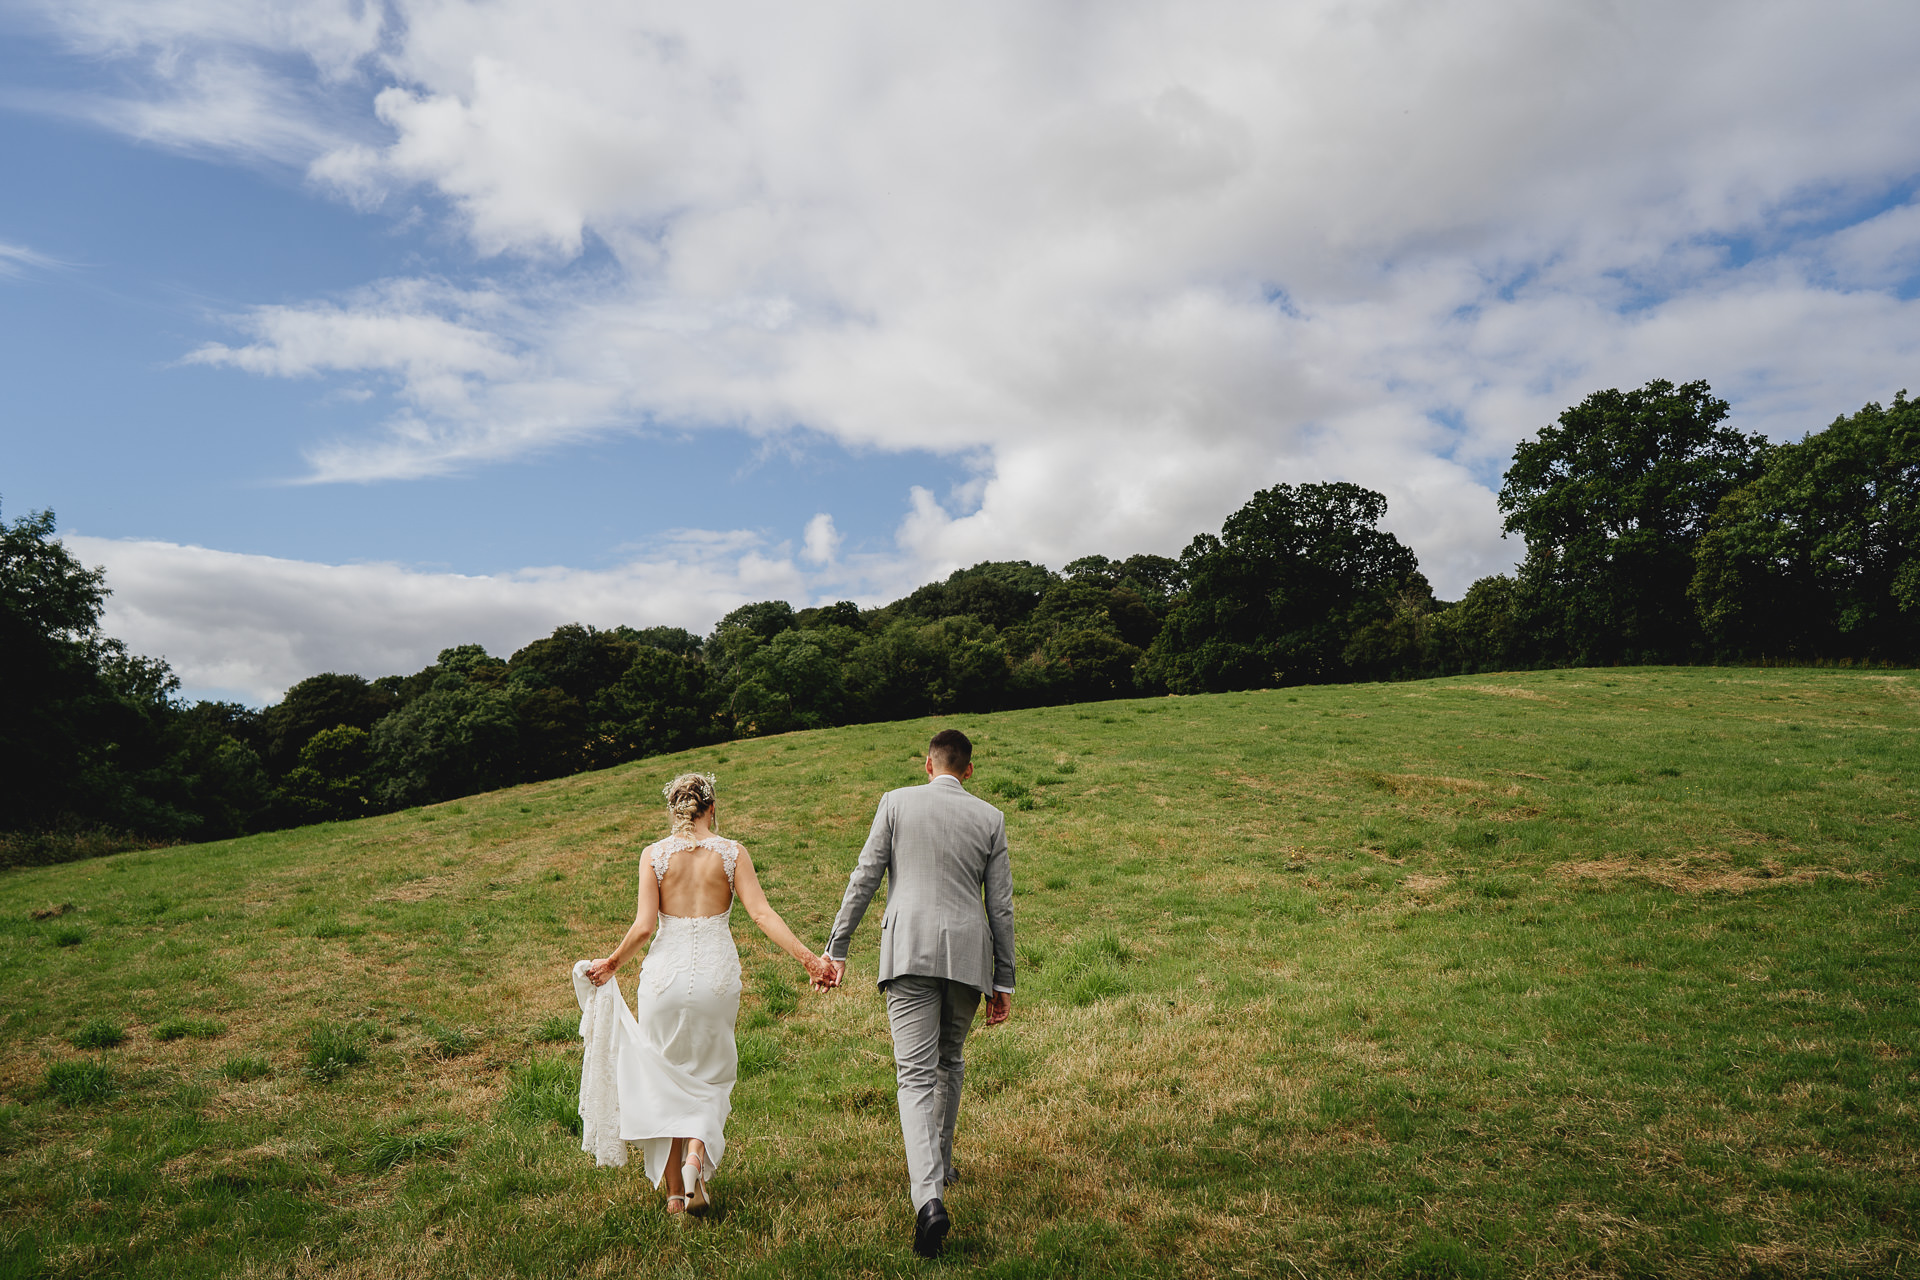 A bride and groom on hills with countryside around them